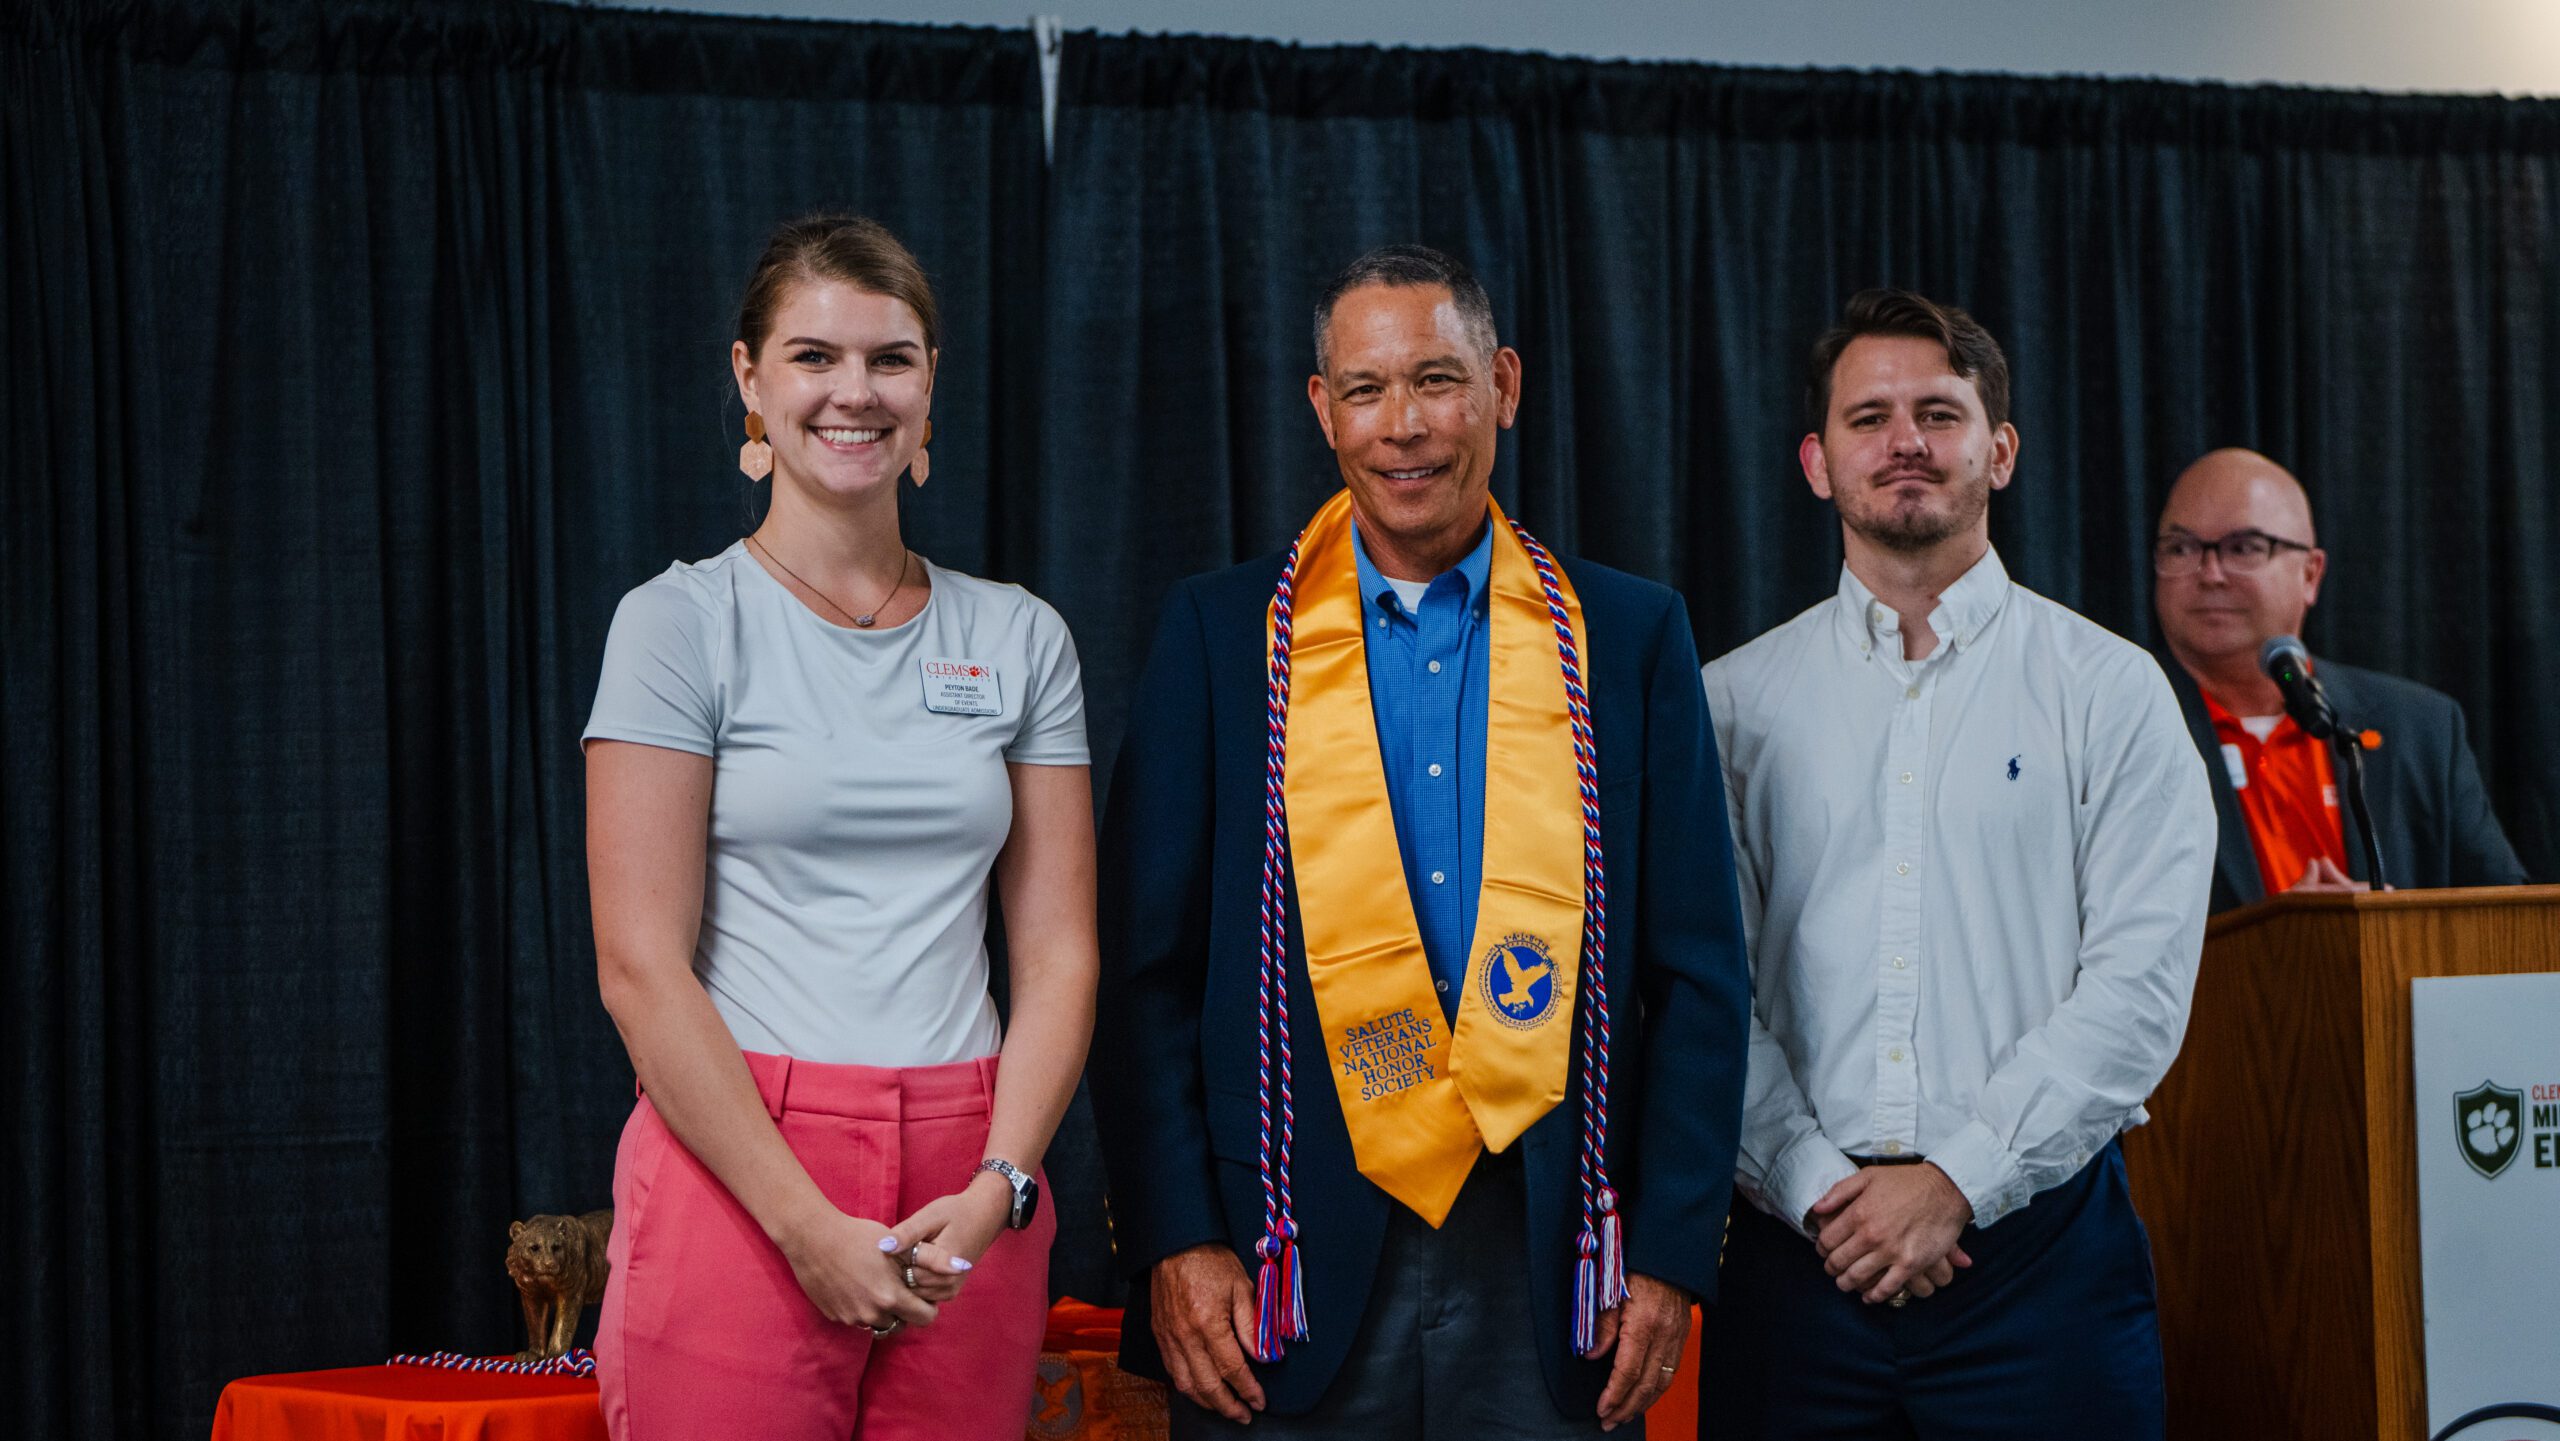 Craig Wells receives his Americana cords and honor stoles as a master's degree candidate and student veteran at the 2024 Service Member Graduation Recognition on Monday, May 6